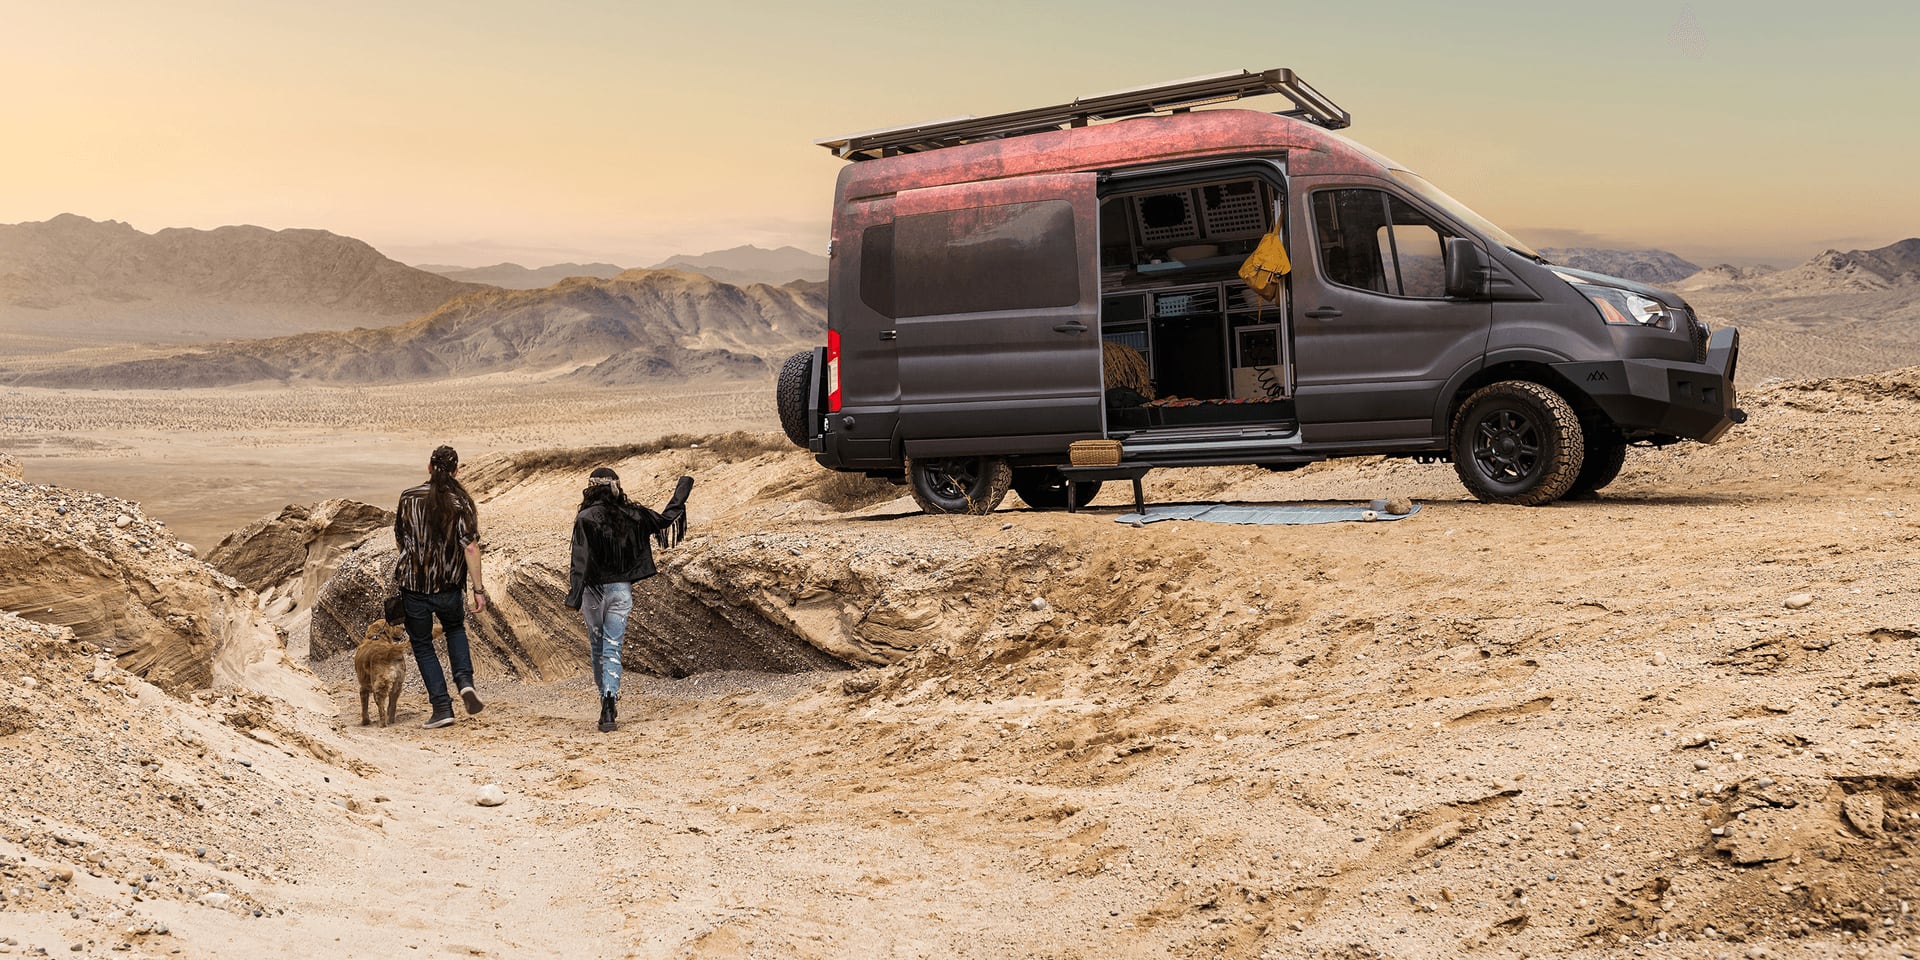 A man is on one knee in front of a red Transit campervan in the desert, taking a picture of a woman crouched next to a golden retriever.